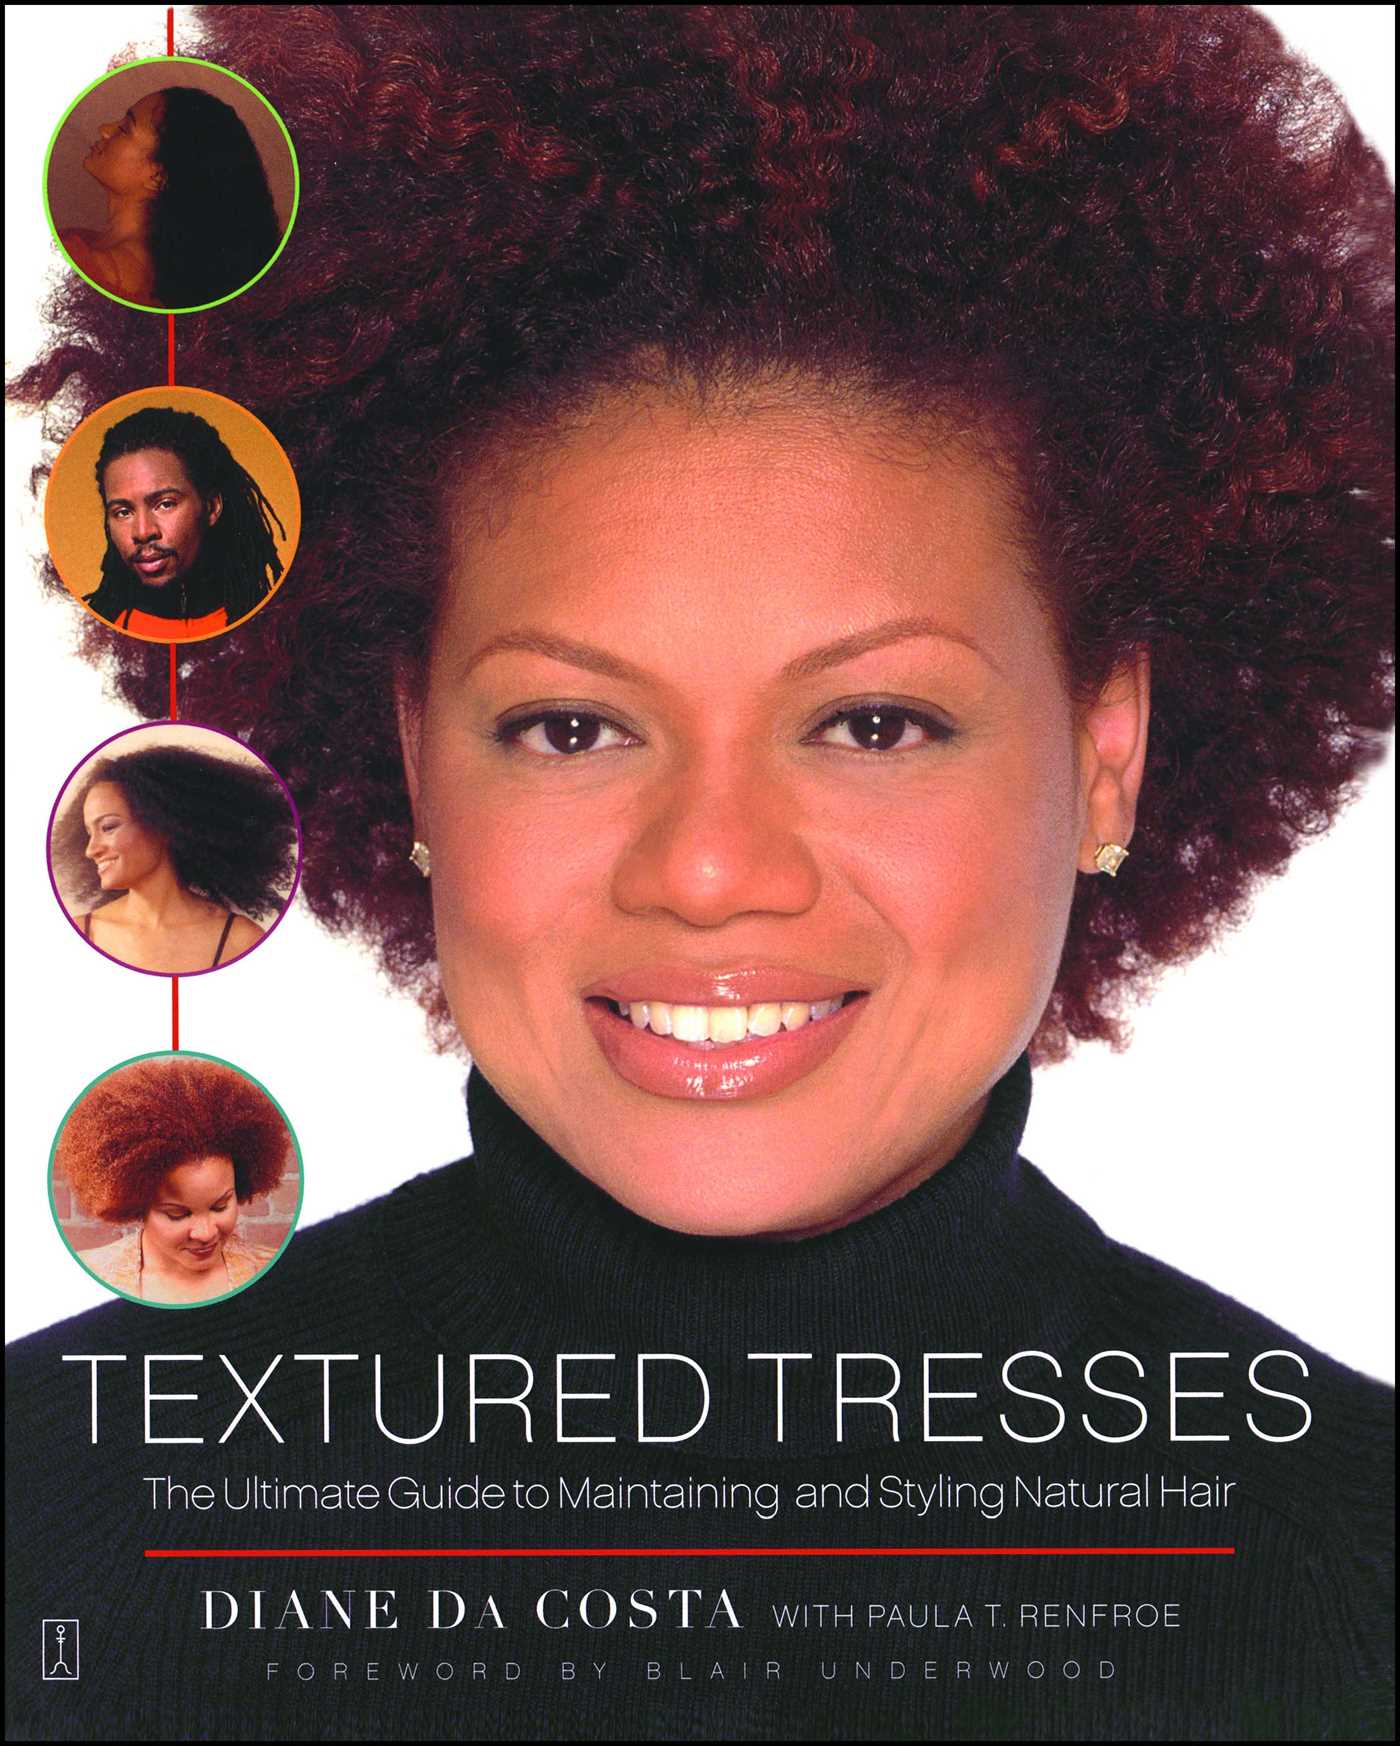 Textured Tresses : The Ultimate Guide to Maintaining and Styling Natural Hair (Paperback) - image 1 of 1